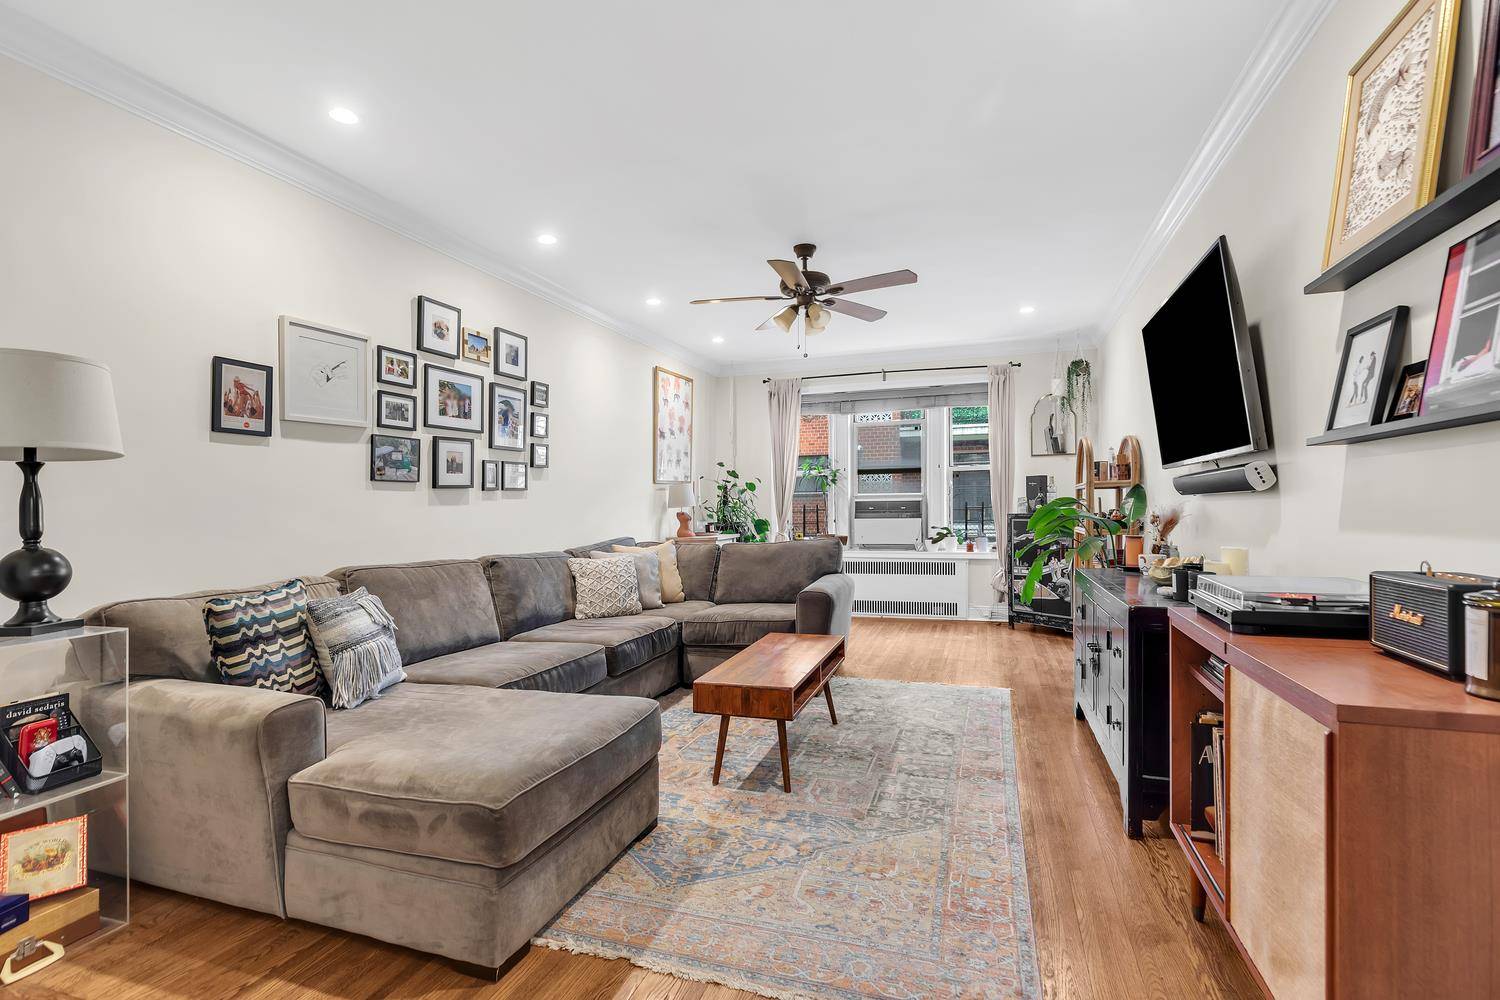 Gorgeous, mint condition two bedroom coop in one of Bay Ridge's most premiere pre war buildings !